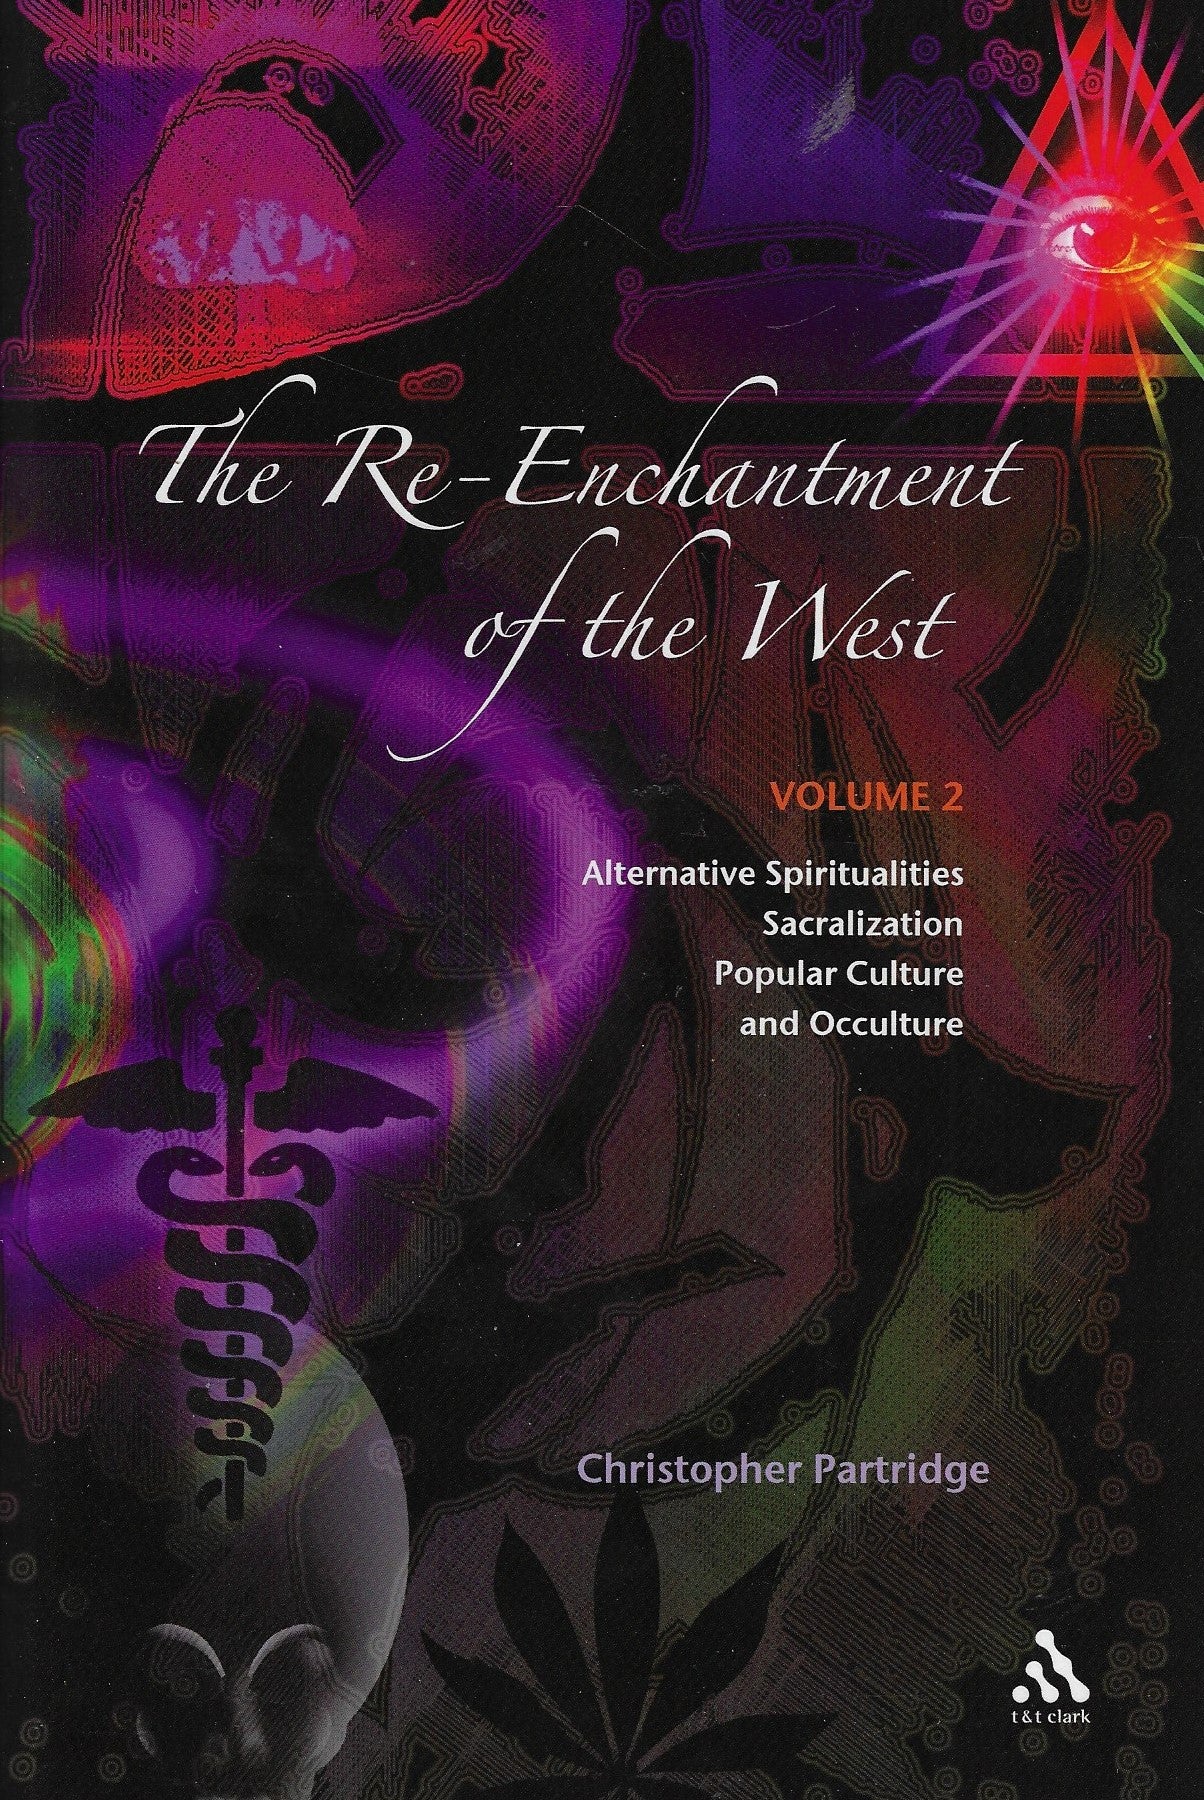 The Re-Enchantment of the West - Alternative Spiritualities, Sacralization, Popular Culture And Occulture